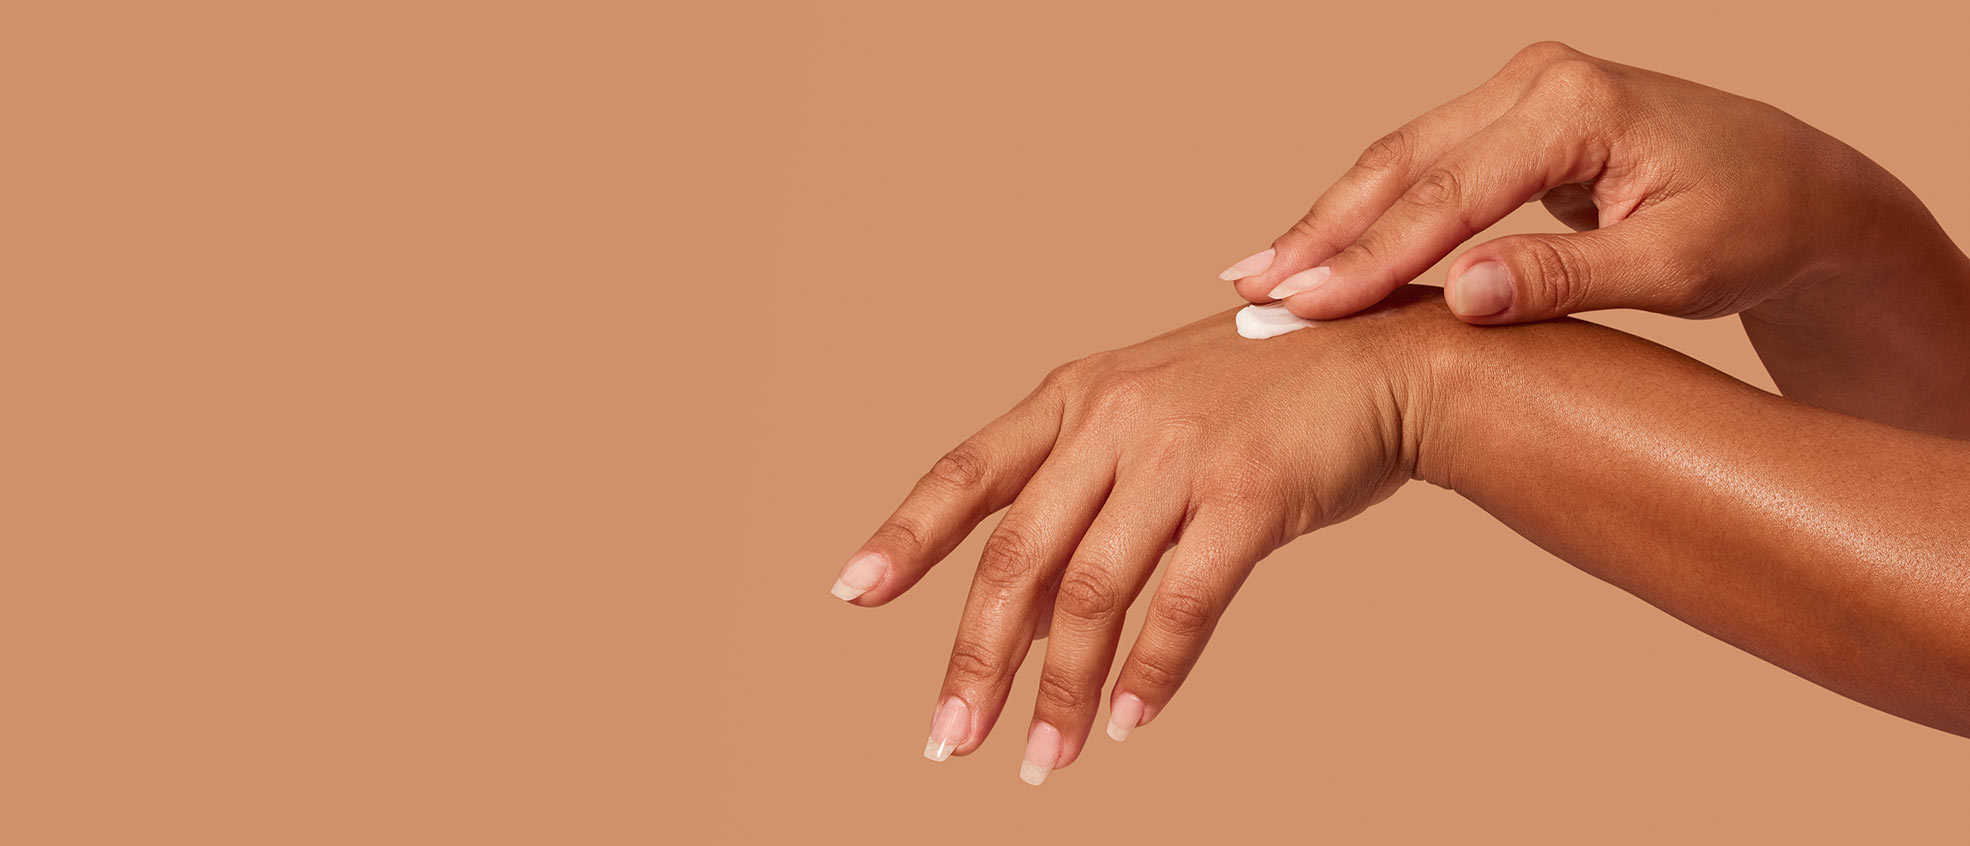 Closeup of a woman's hands applying MONAT's Silky & Soothing Hand Cream over a light peach background.